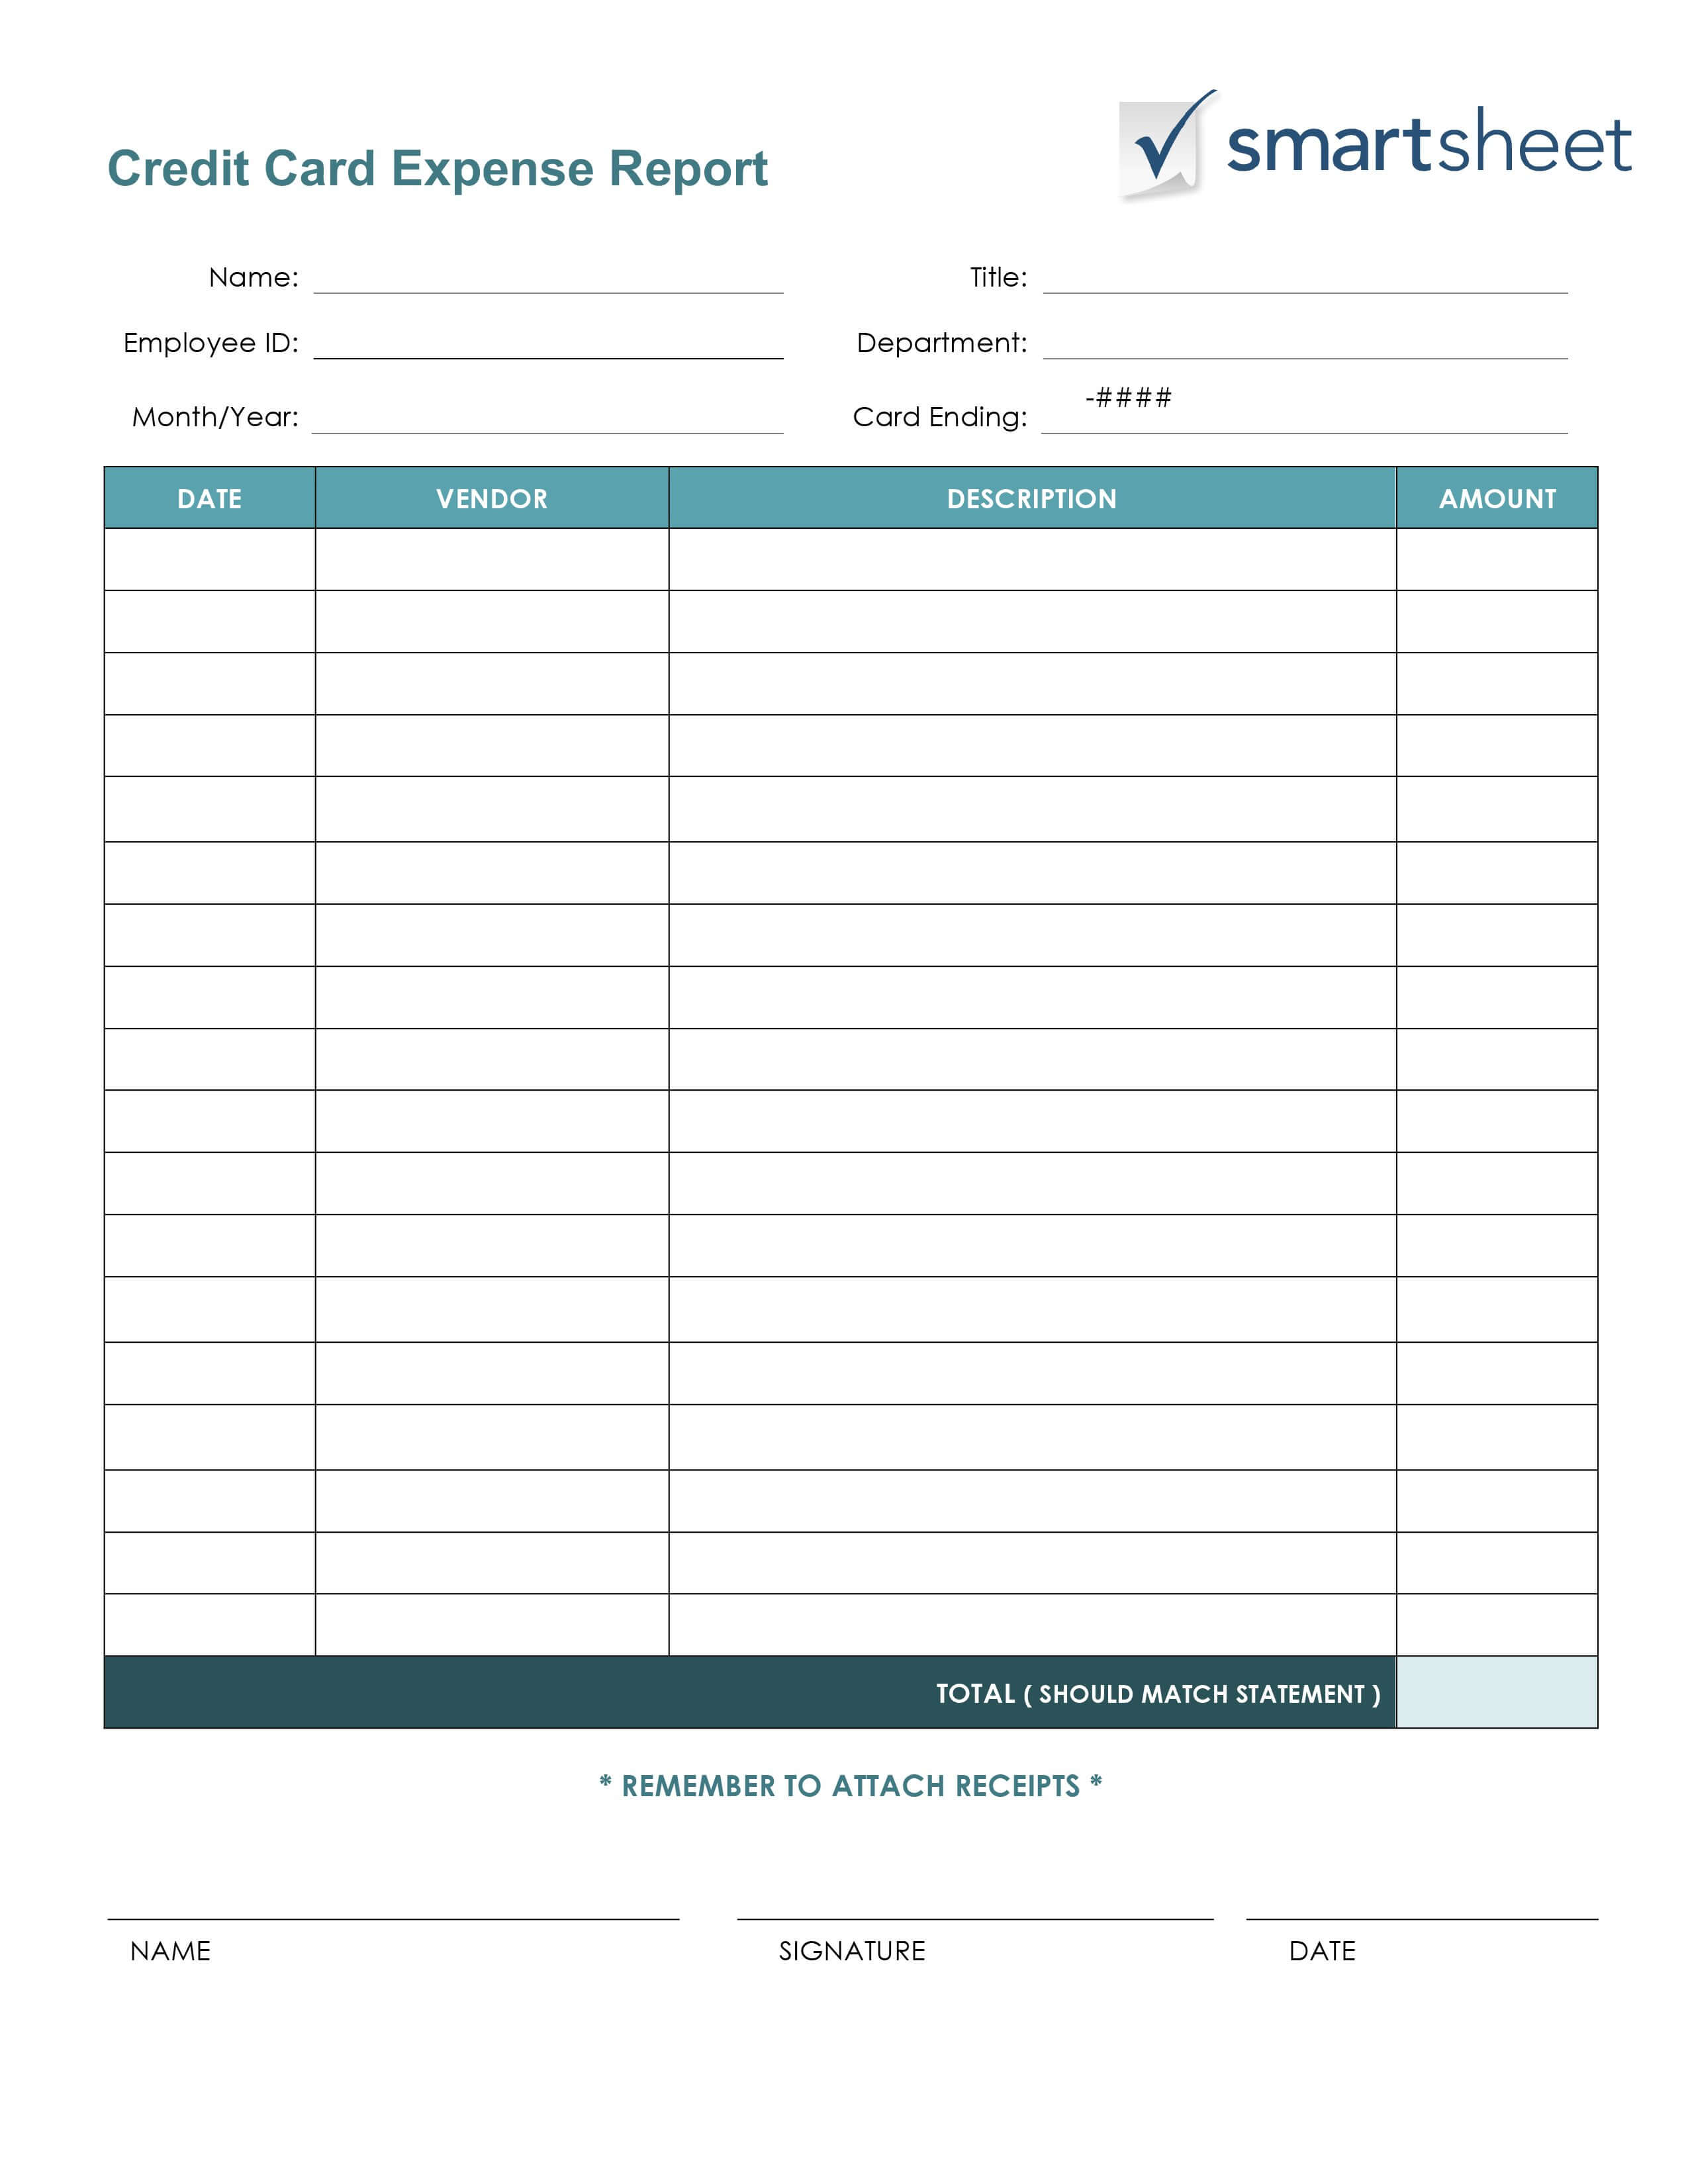 022 Fake Report Card Template Ideas Ic With Fake Report Card Template